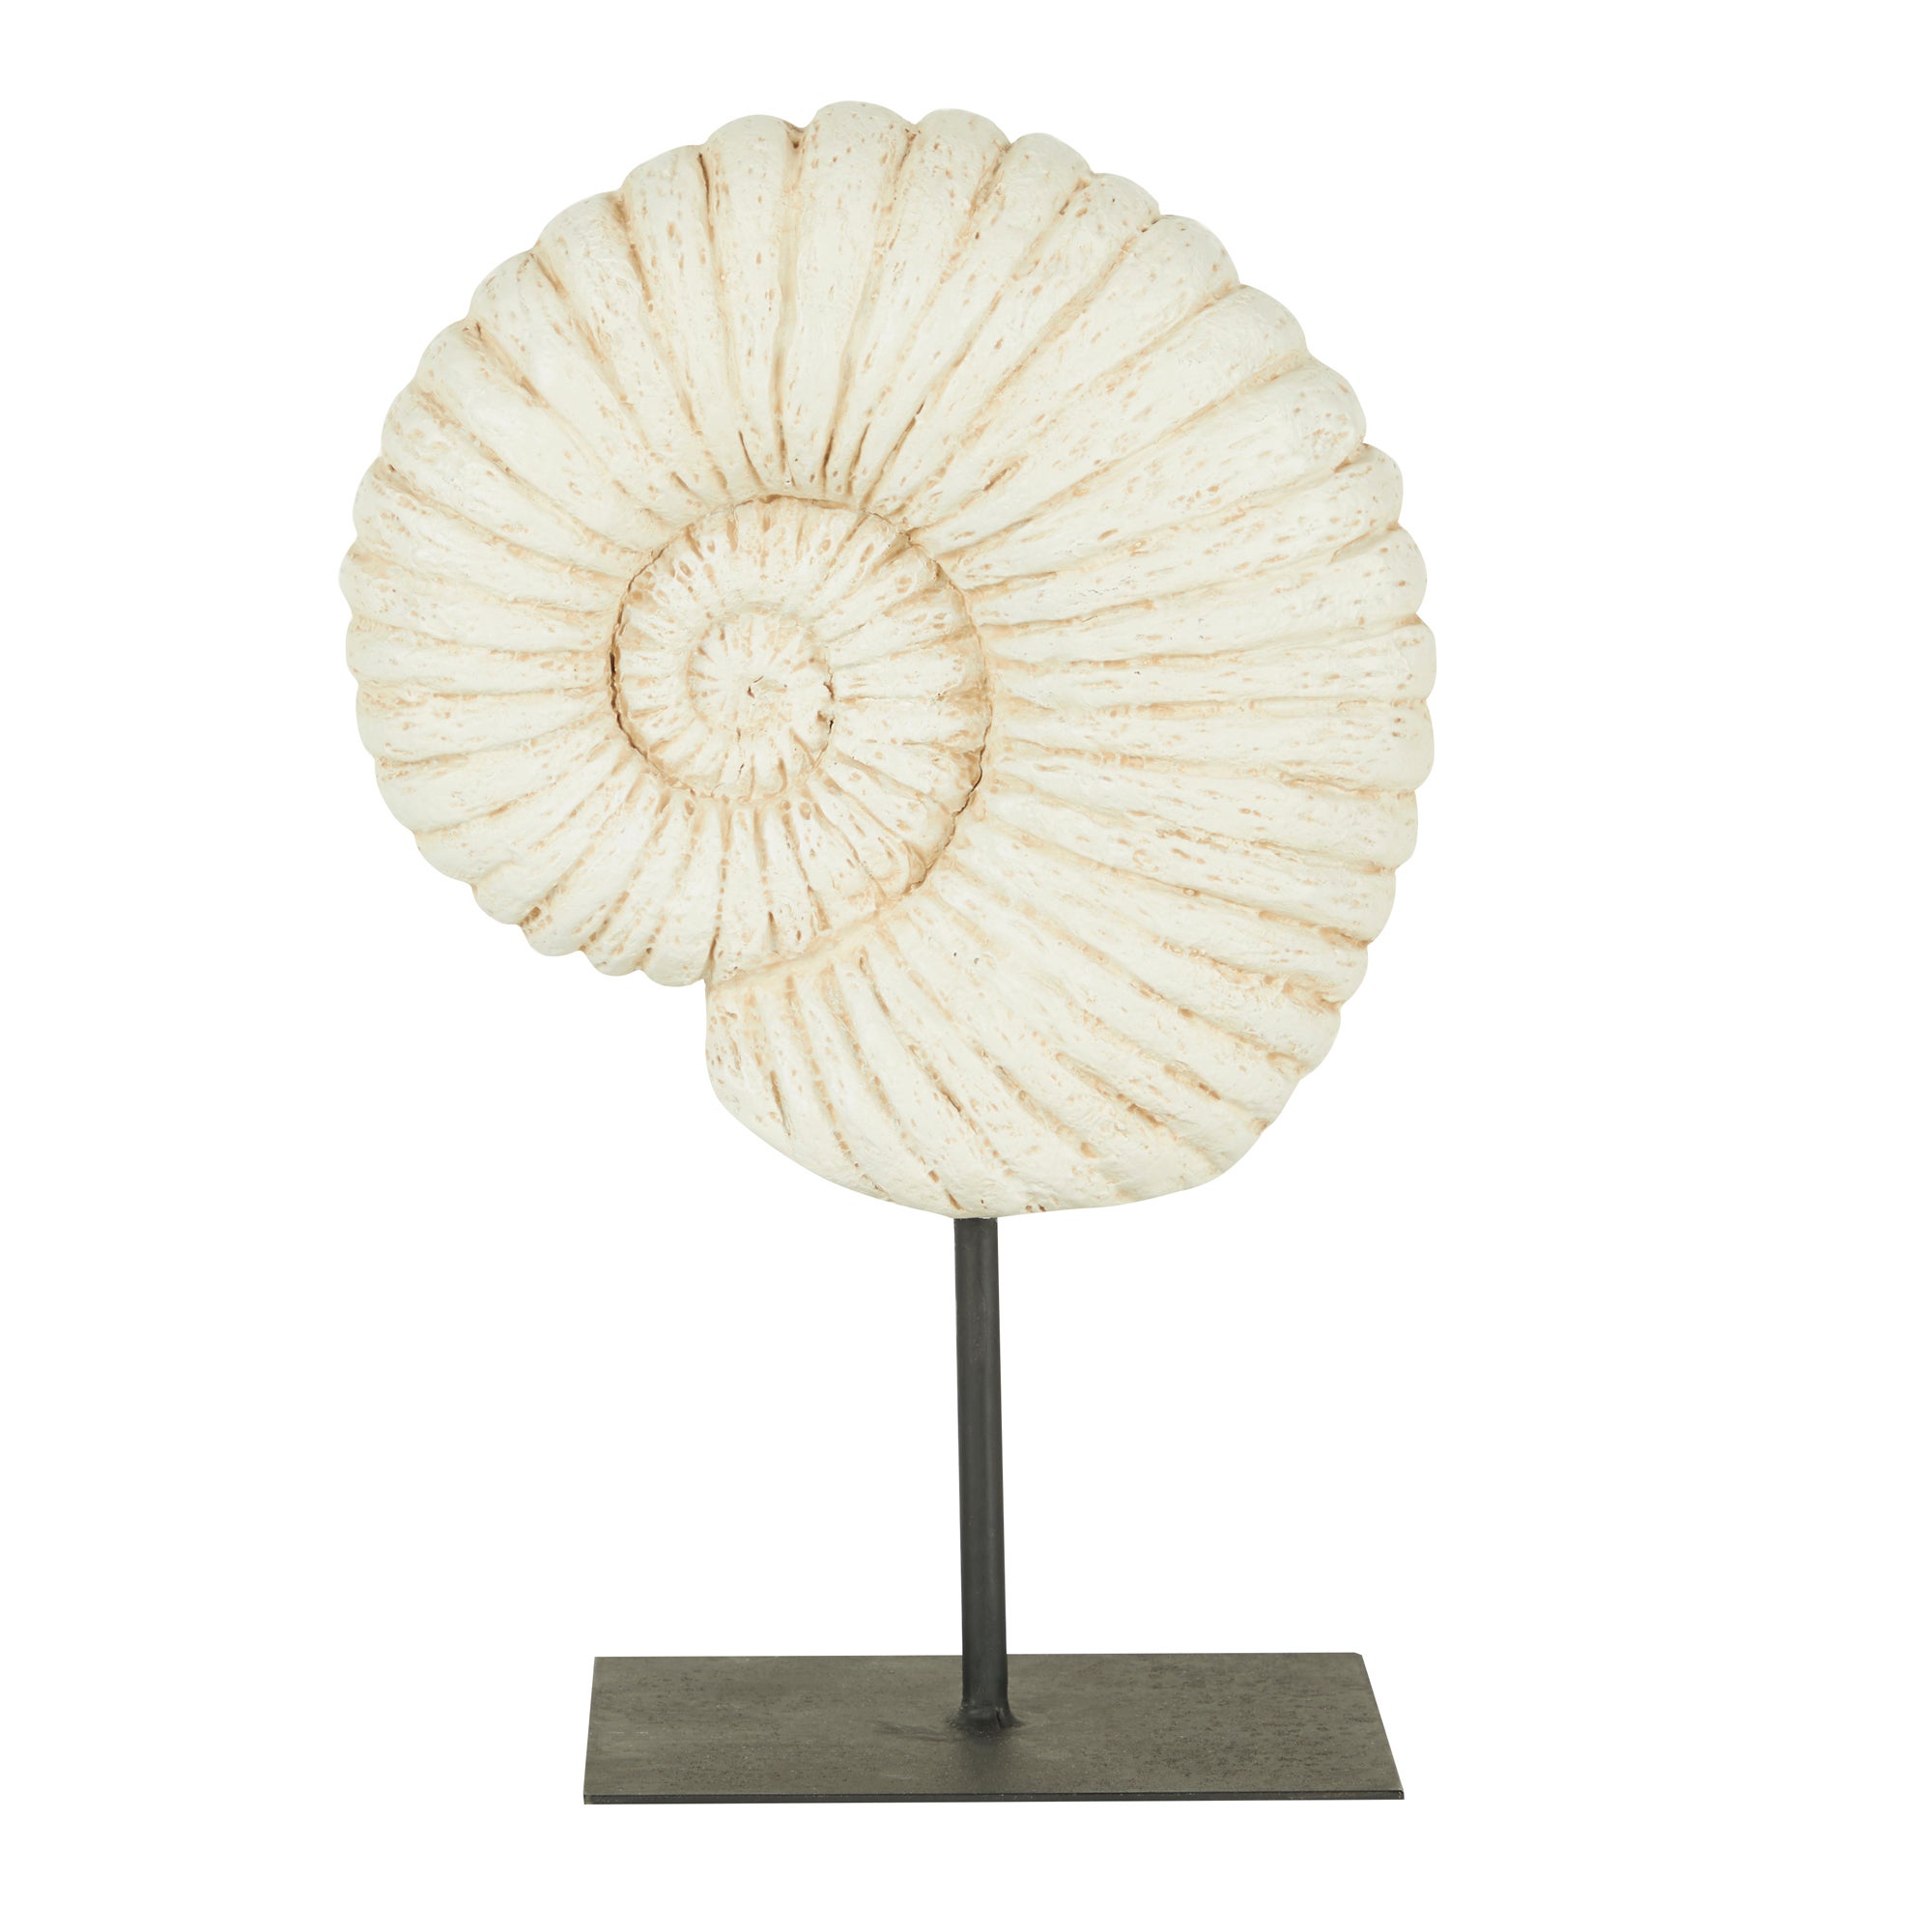 Fossil Shell on Stand Ornament